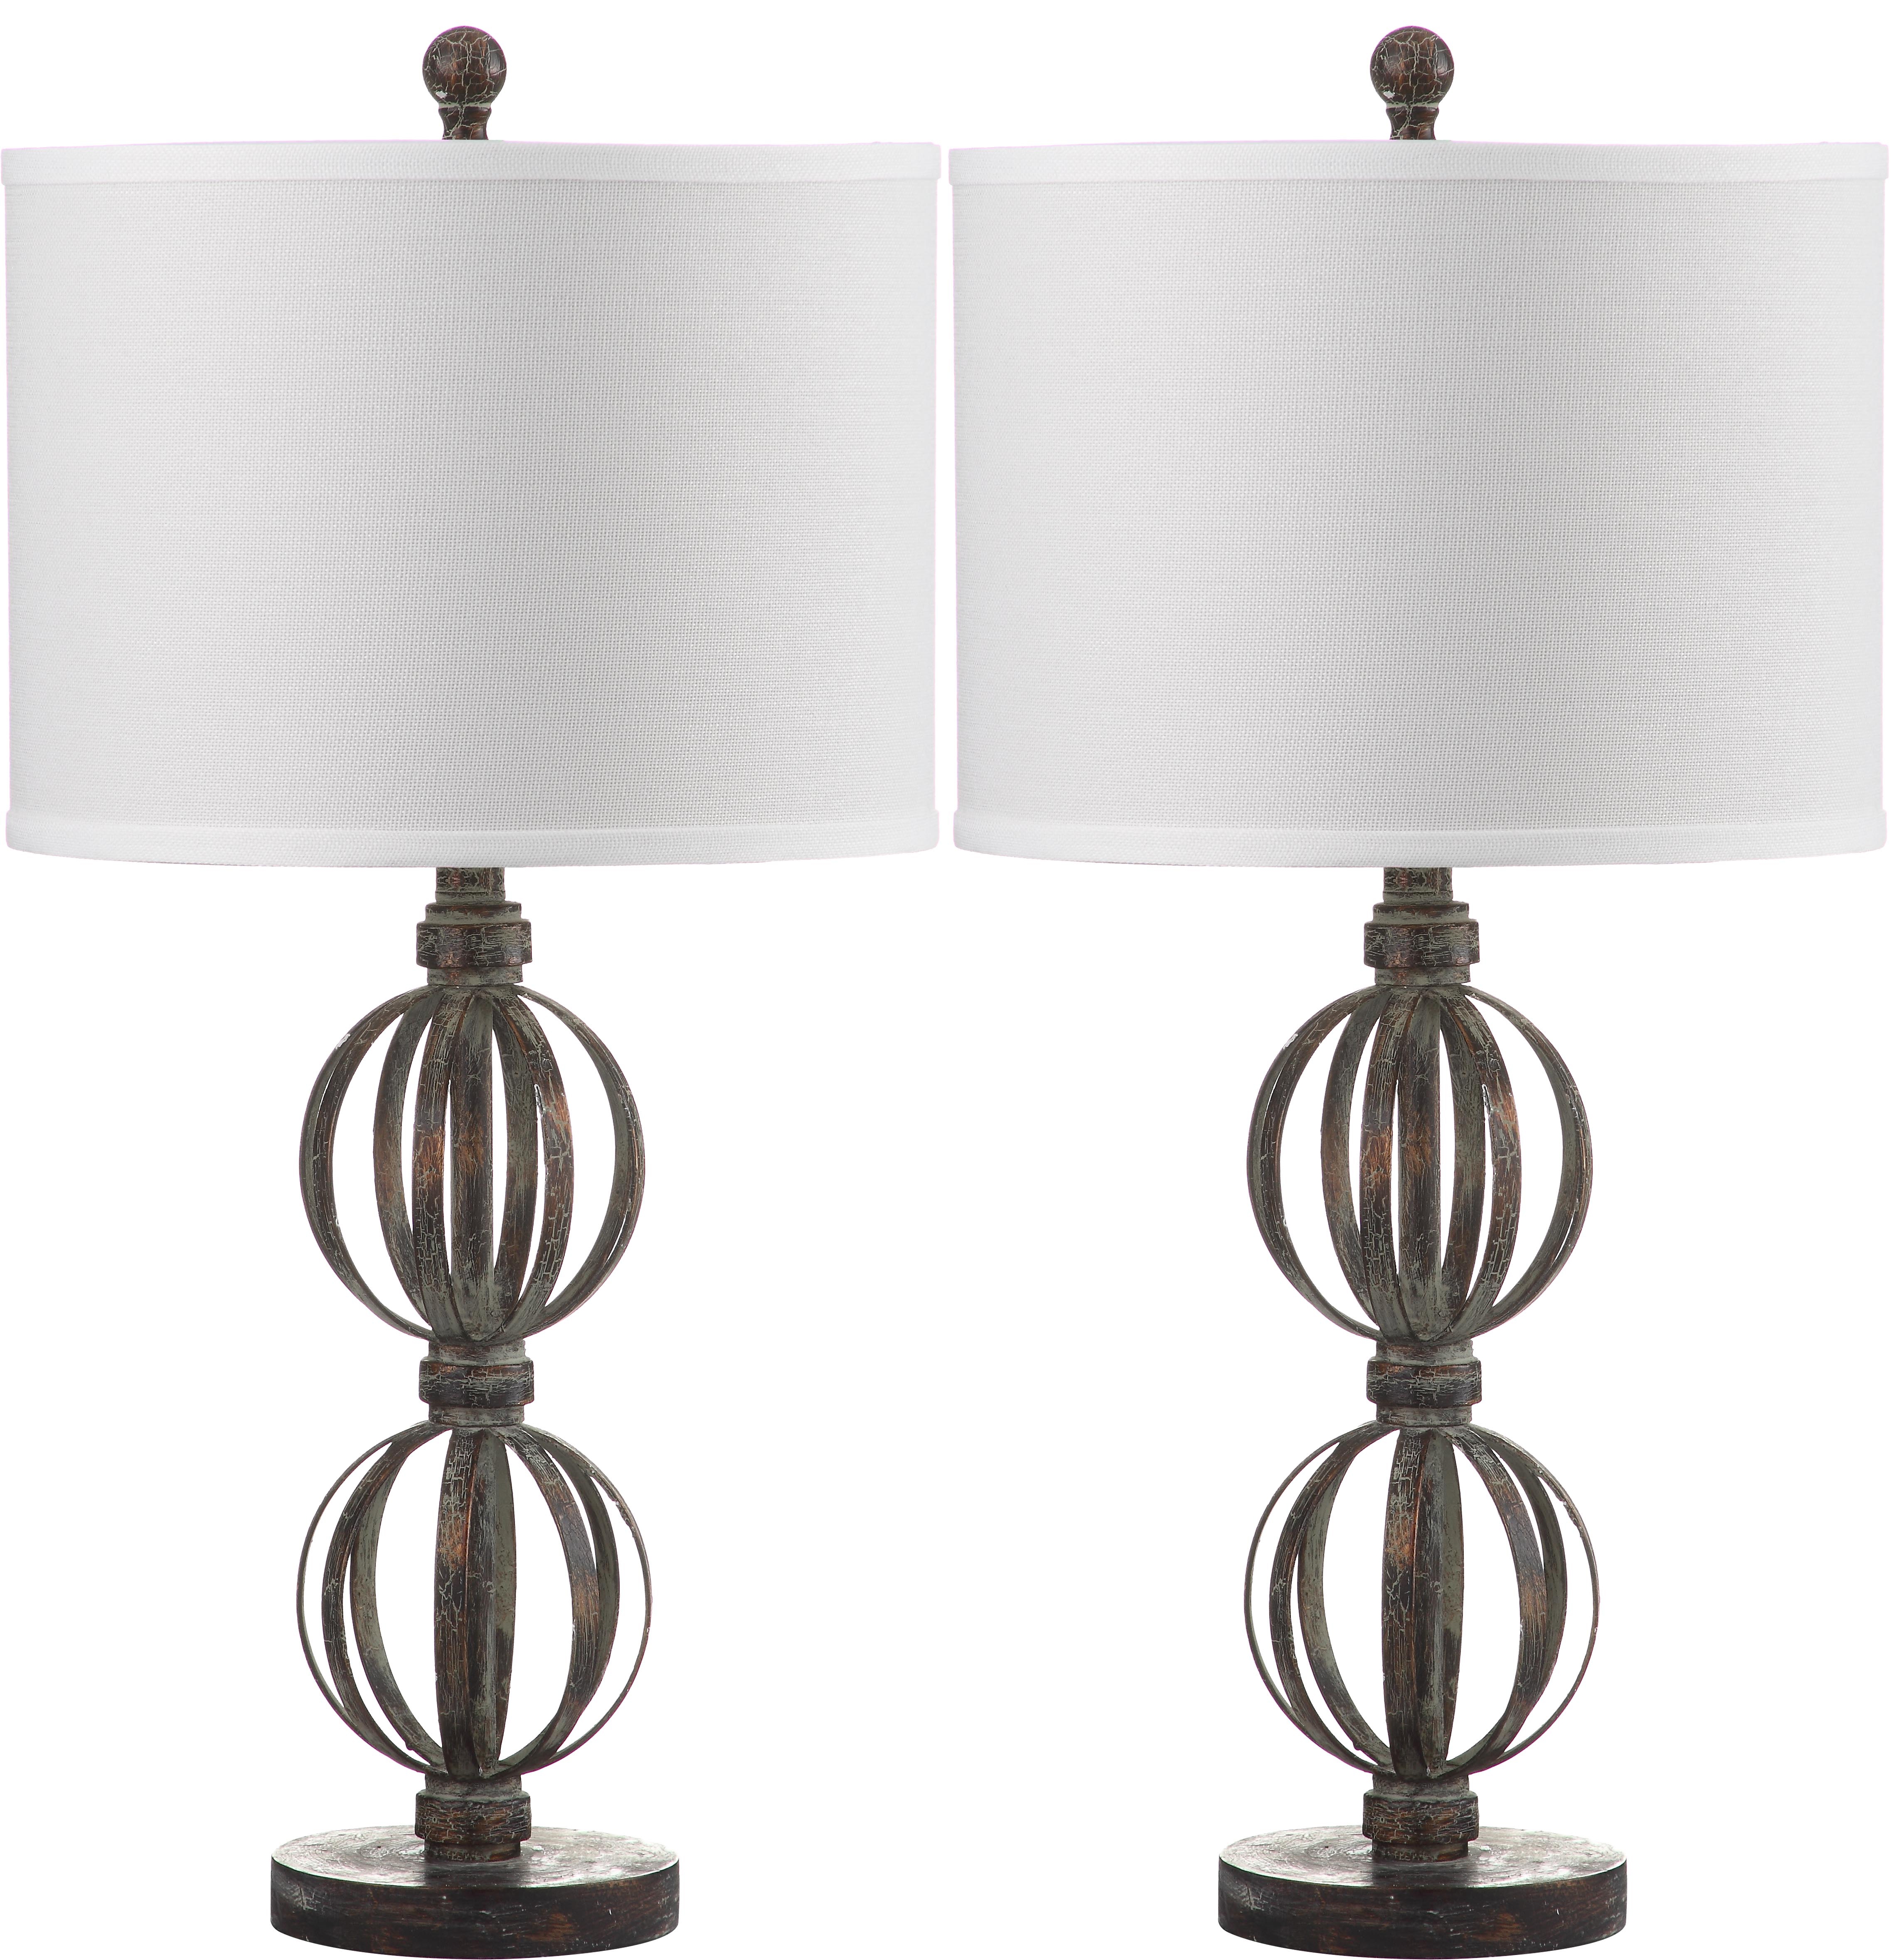 Calista 27.75-Inch H Double Sphere Table Lamp - Oil-Rubbed Bronze - Arlo Home - Image 0